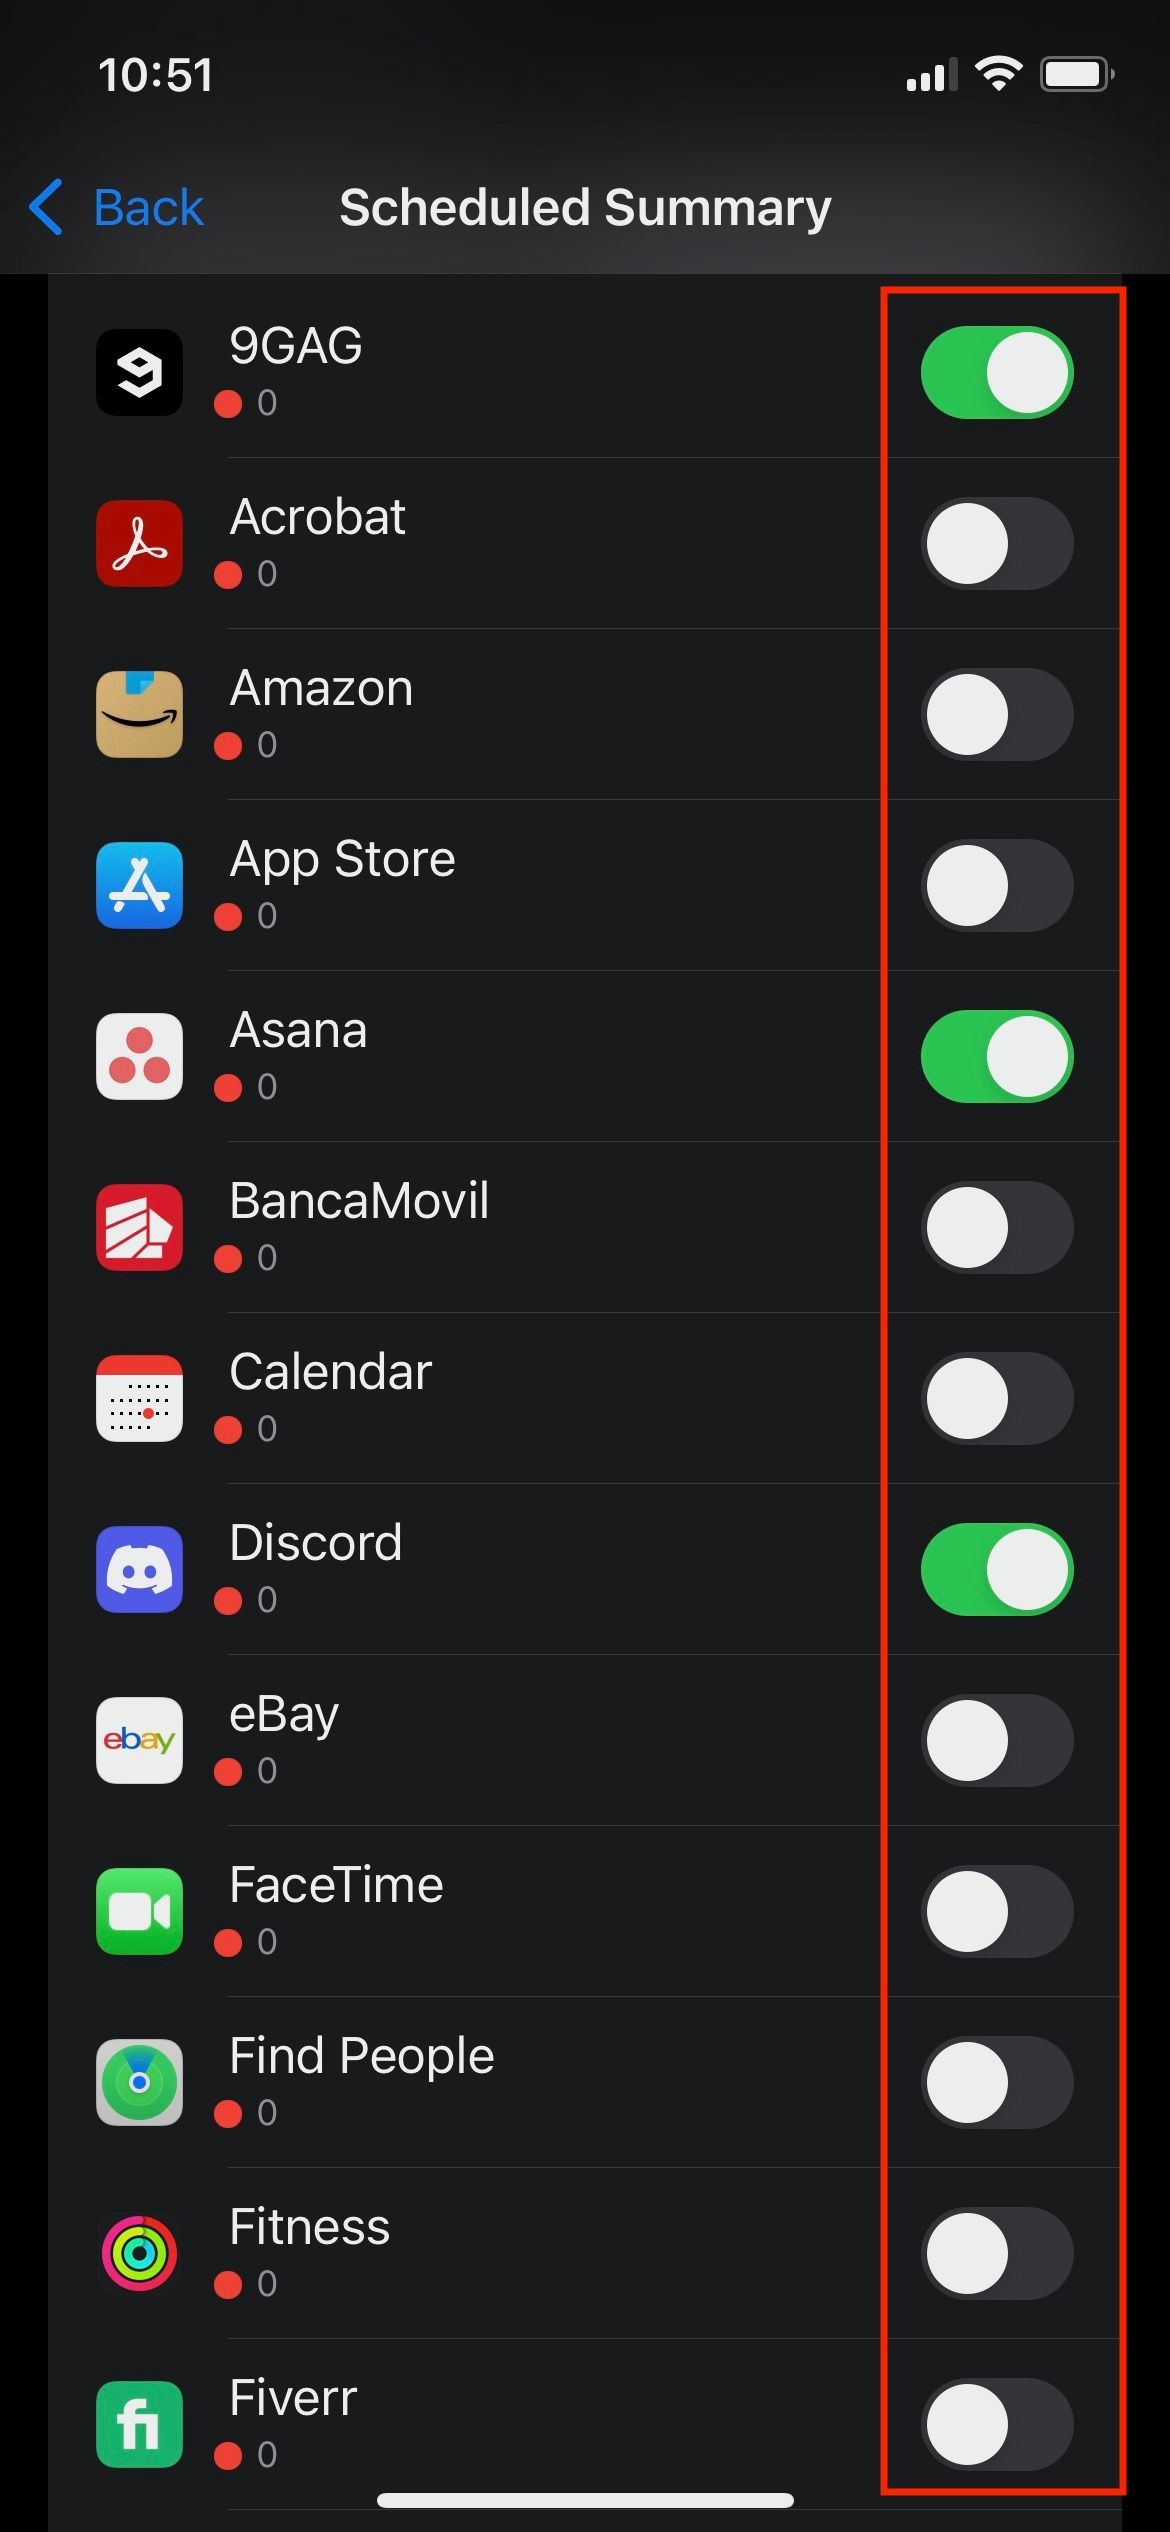 Add apps to Scheduled Summary on iPhone